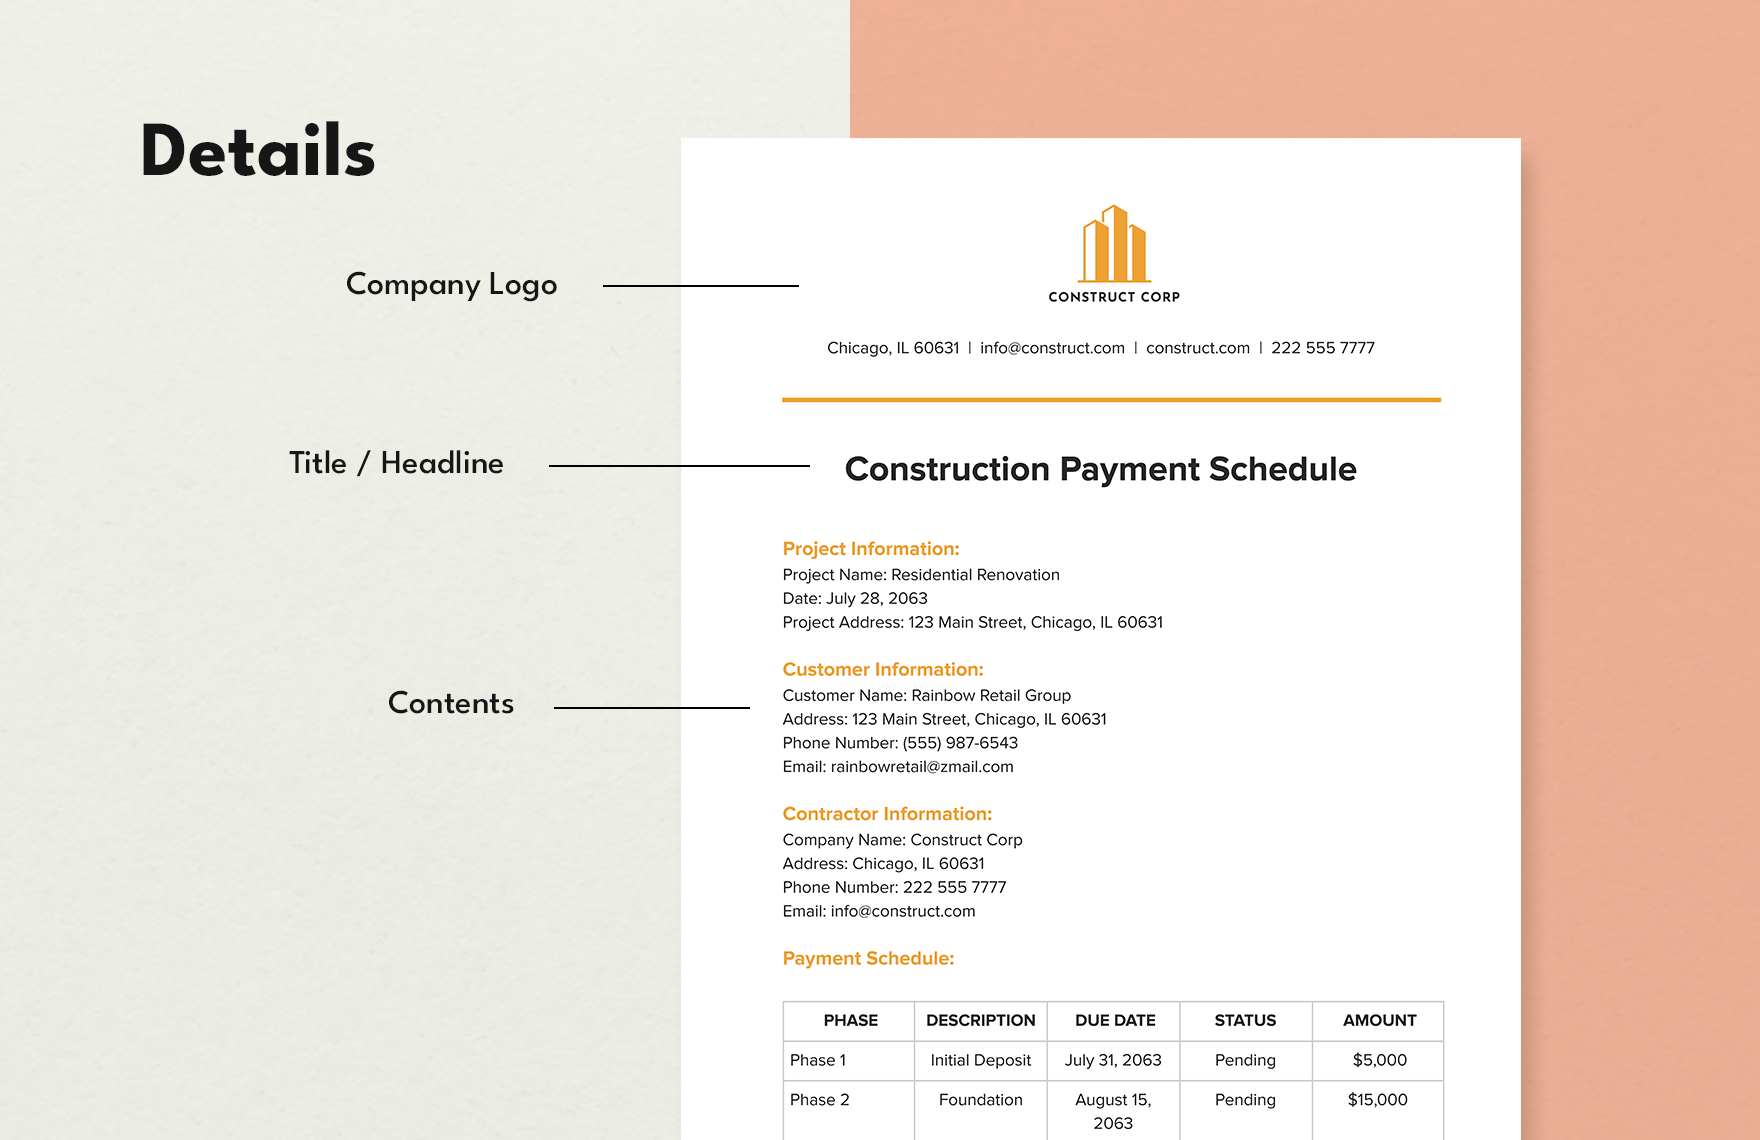 Construction Payment Schedule Template